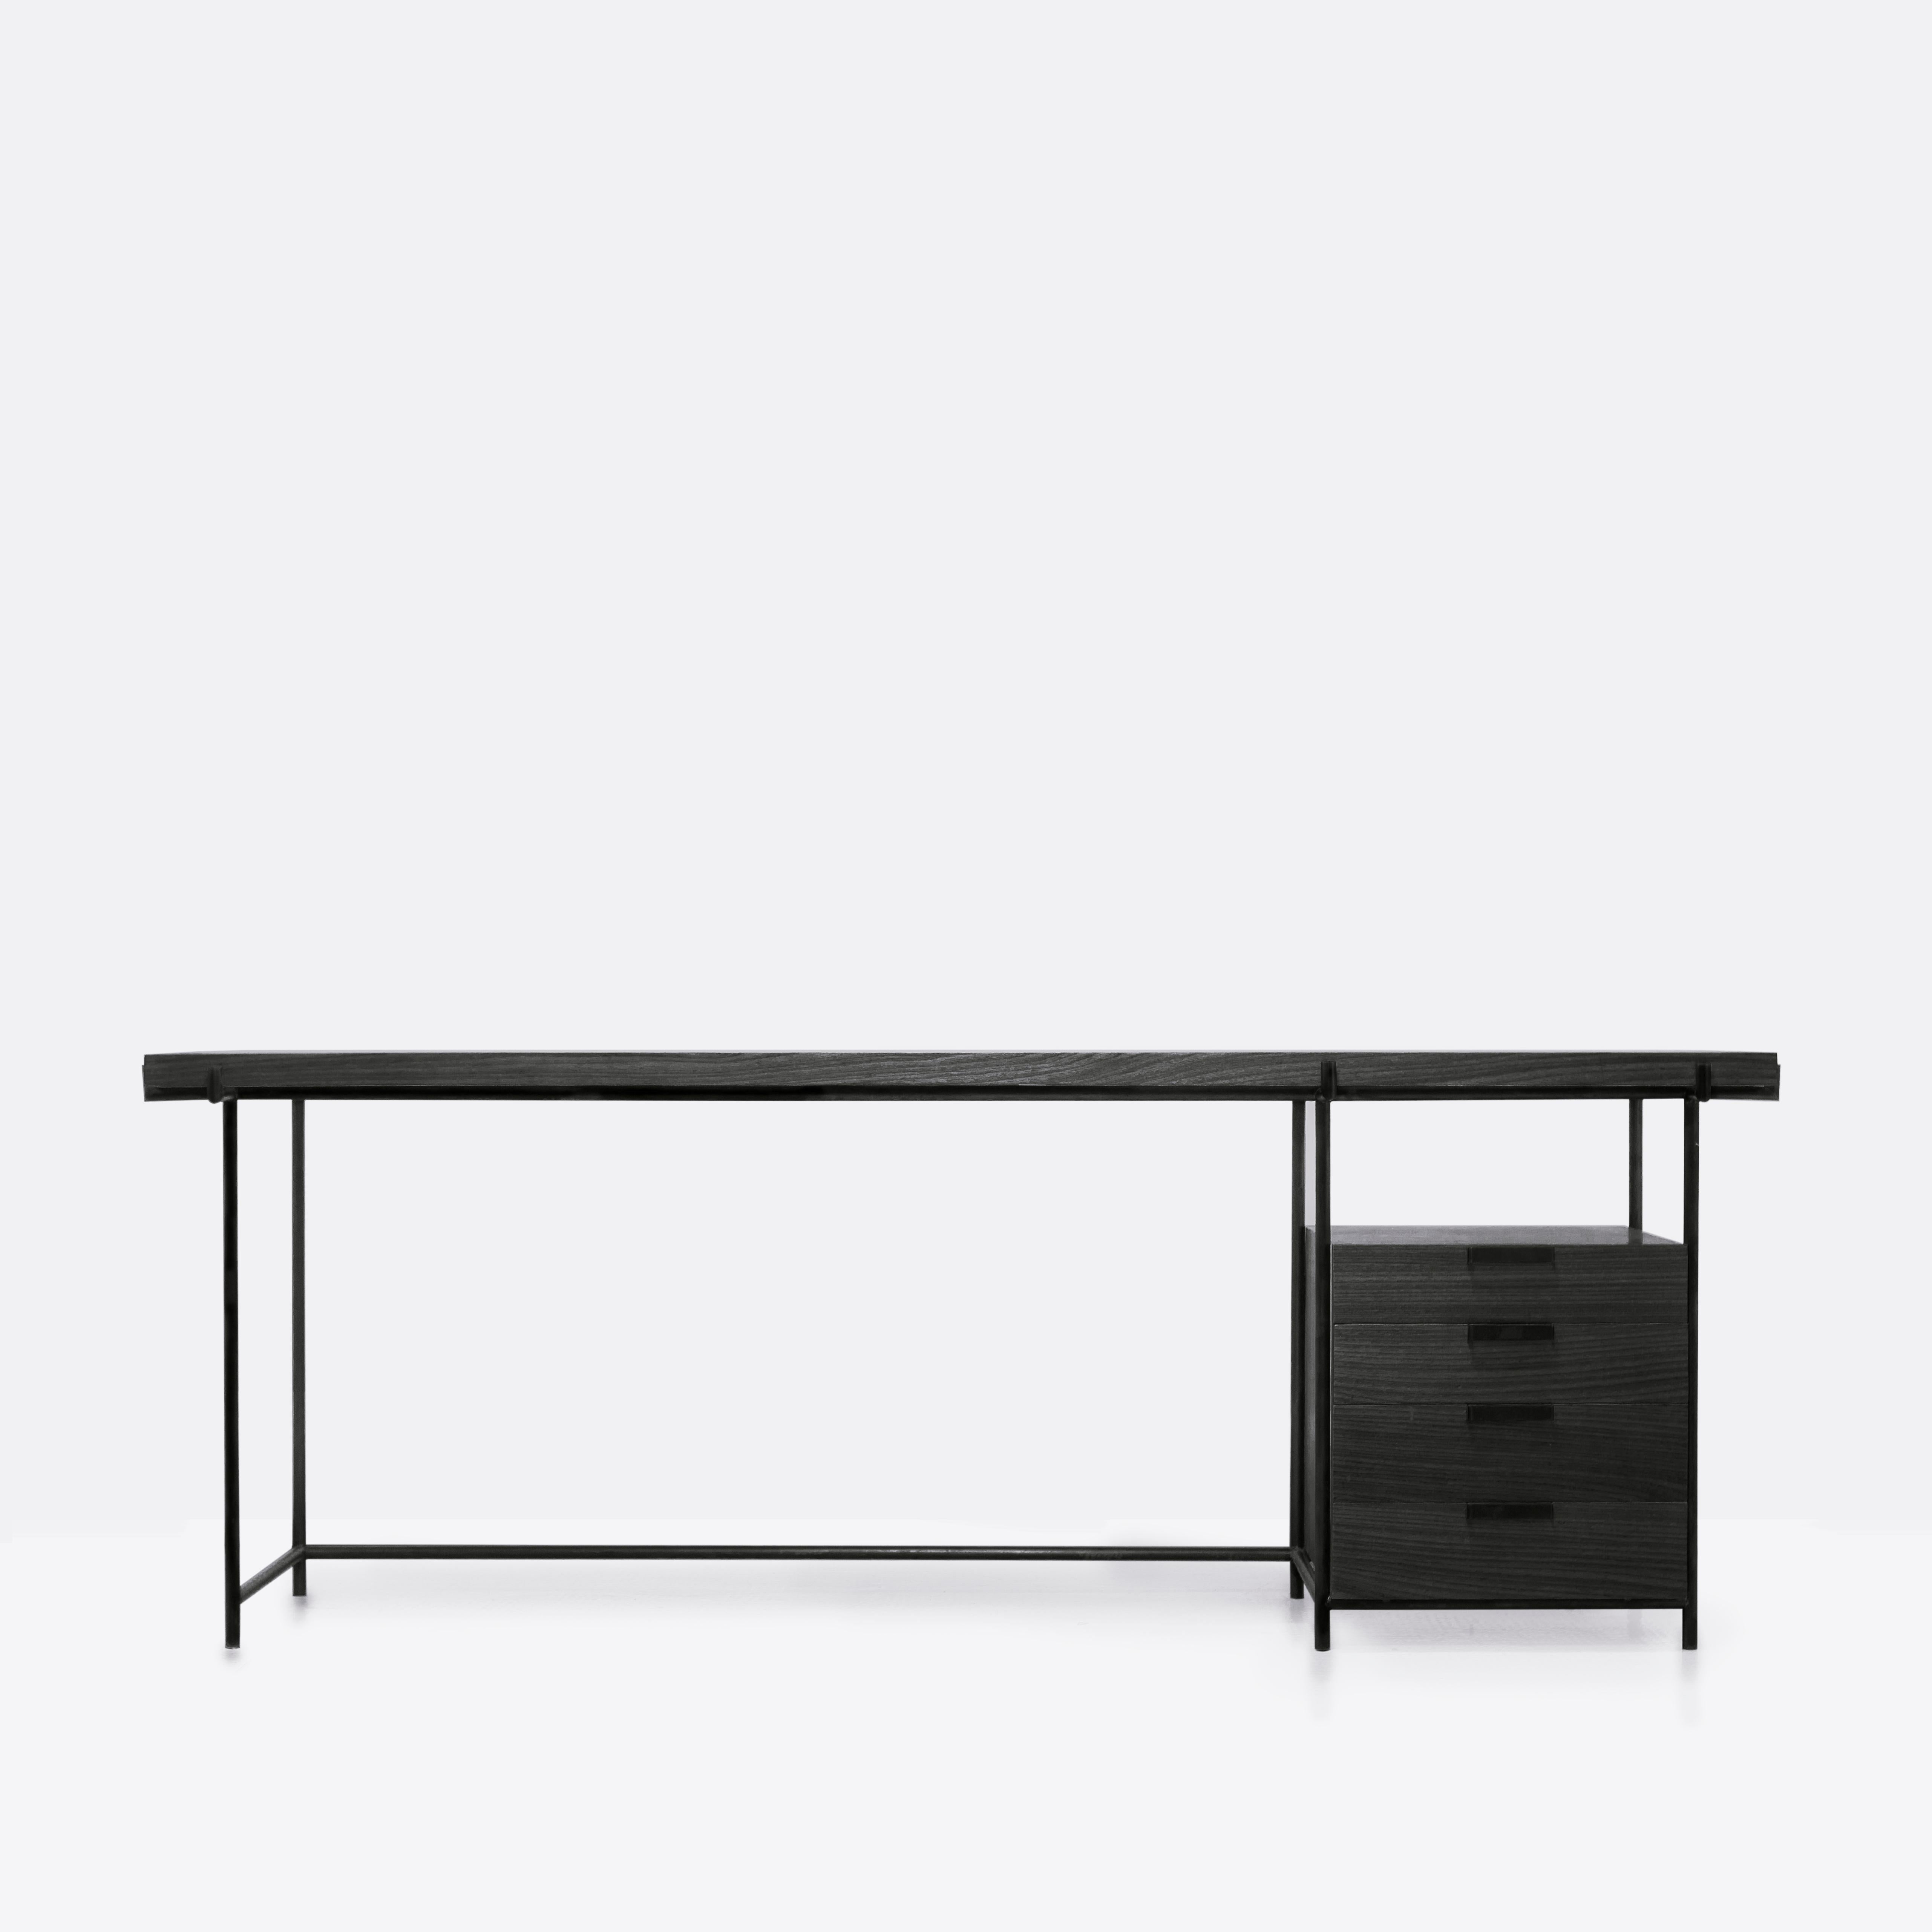 Marajoara desk with drawers and files (optional) is a study on Mid Century Modern utilitarian furniture, with Brazilian Native Arte Reference.

In tribute to Lina Bo Bardi's design, this desk has a mixed esthetic of Mid Century Modernism with a